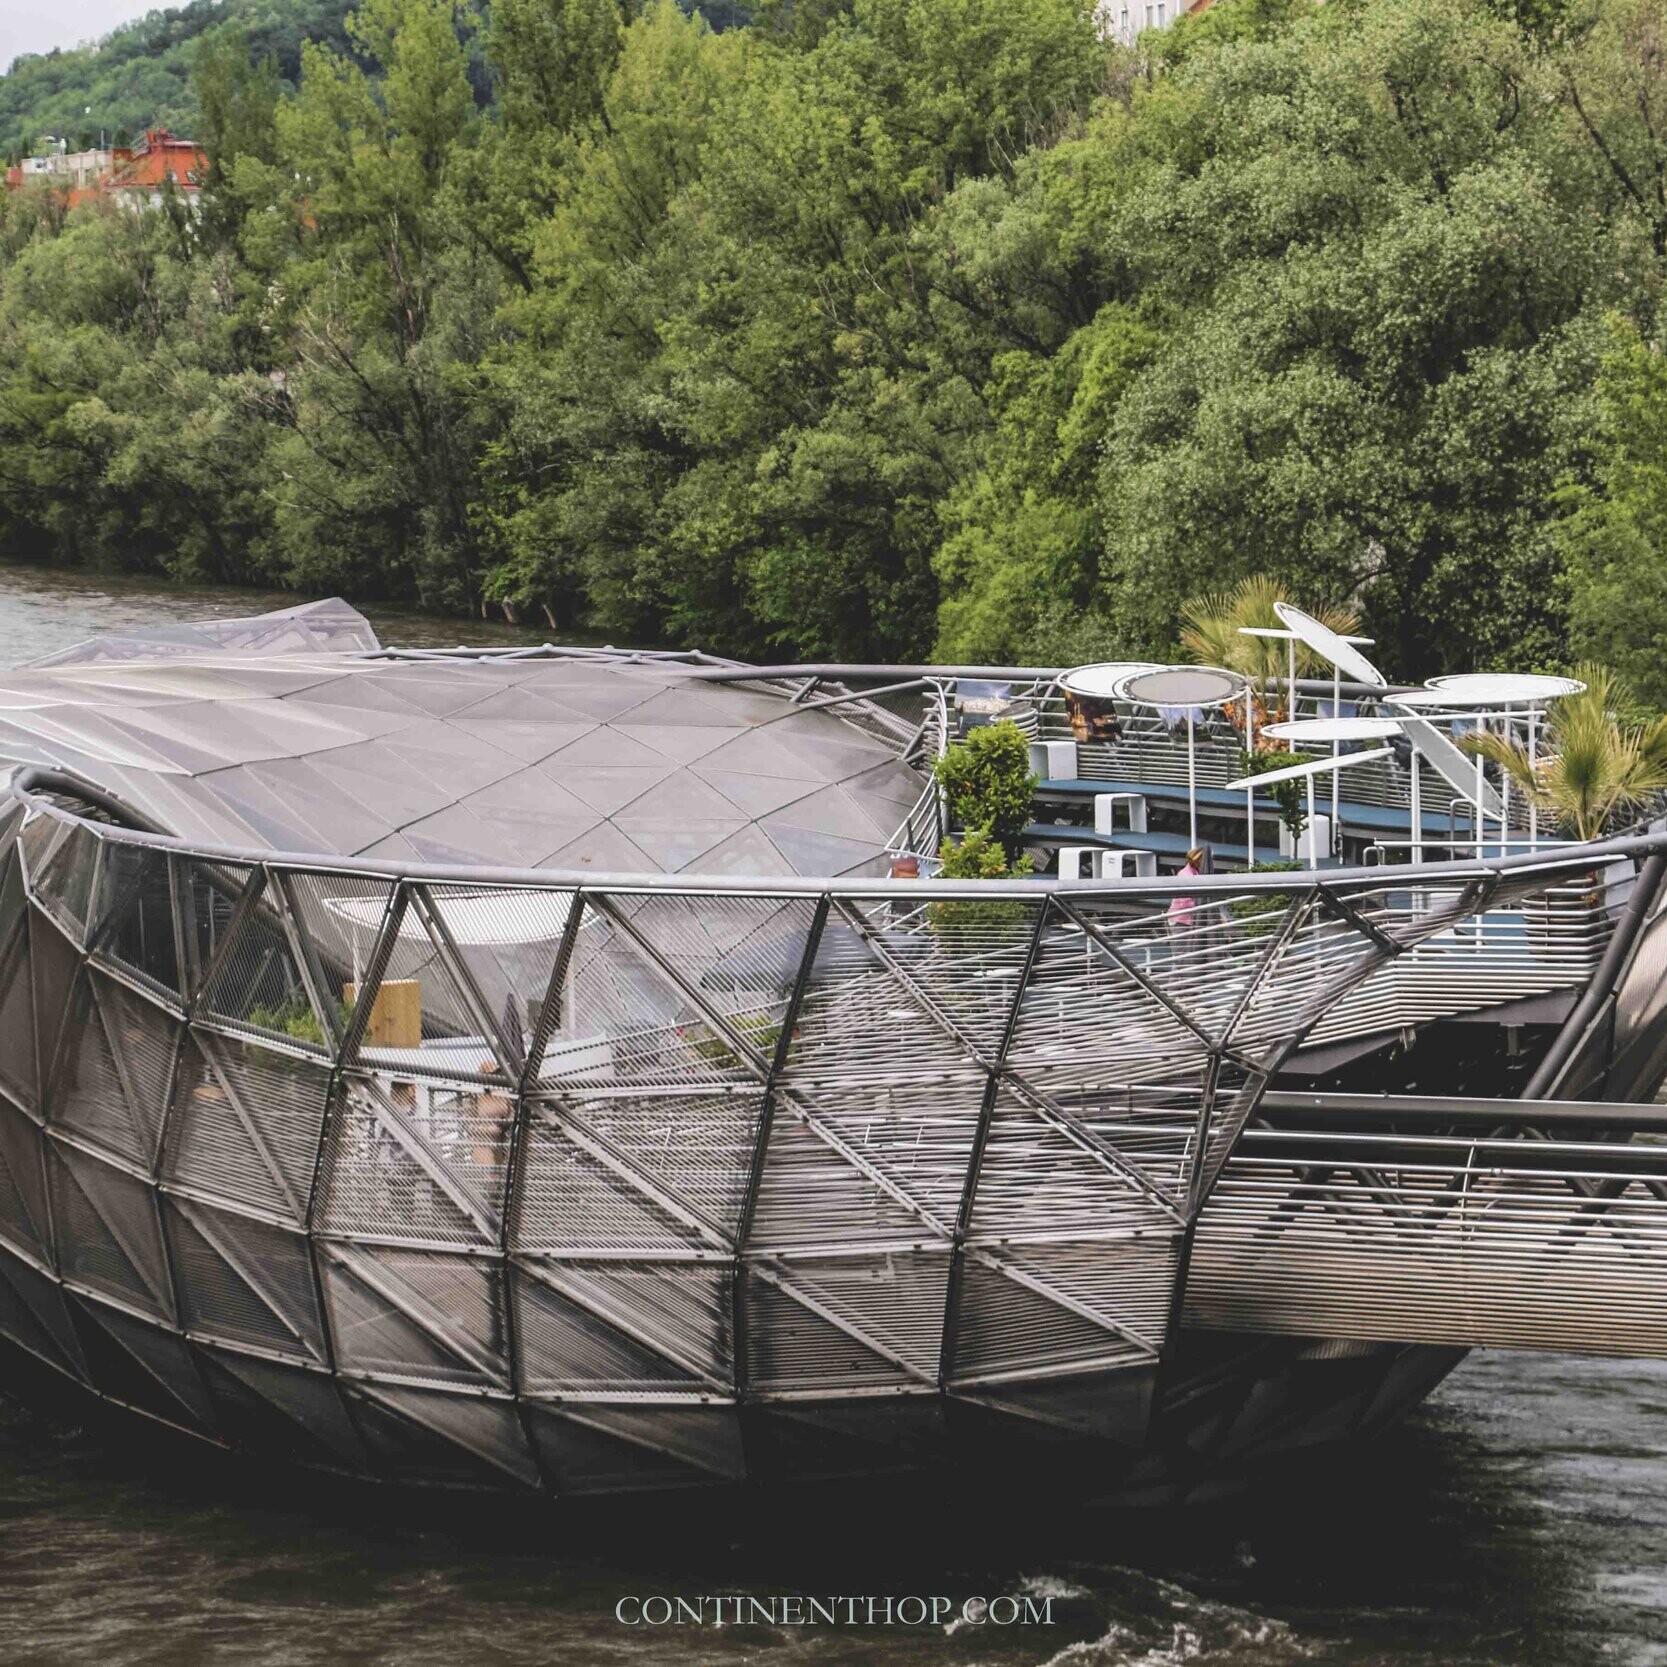 Things to see in Graz - The Murinsel cafe on your Austria itinerary